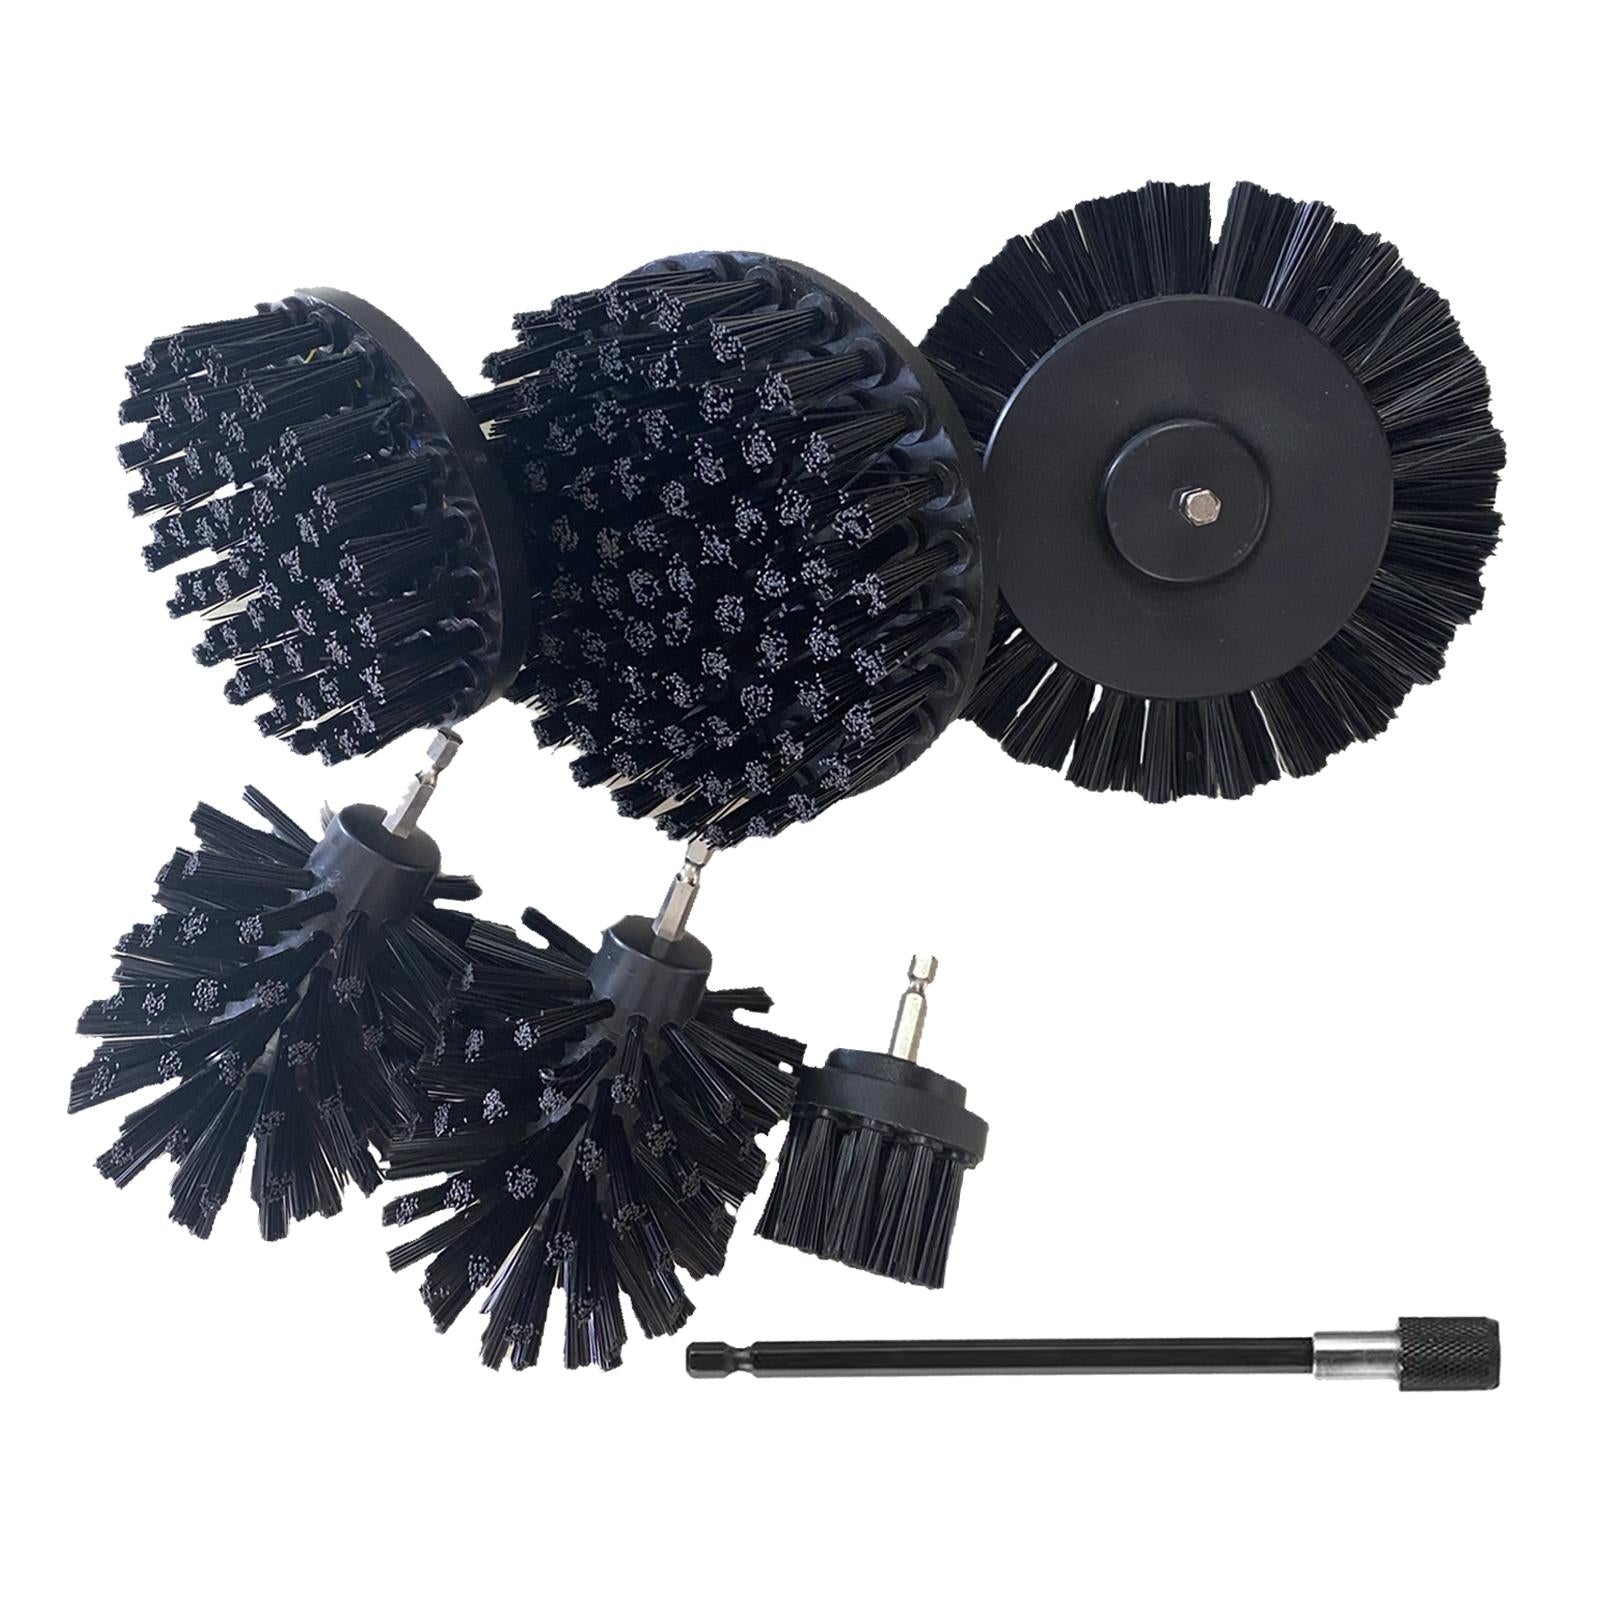 7Pcs Drill Brush Attachment Cleaner Combo Replacement for Bathtub Sink Grout Black